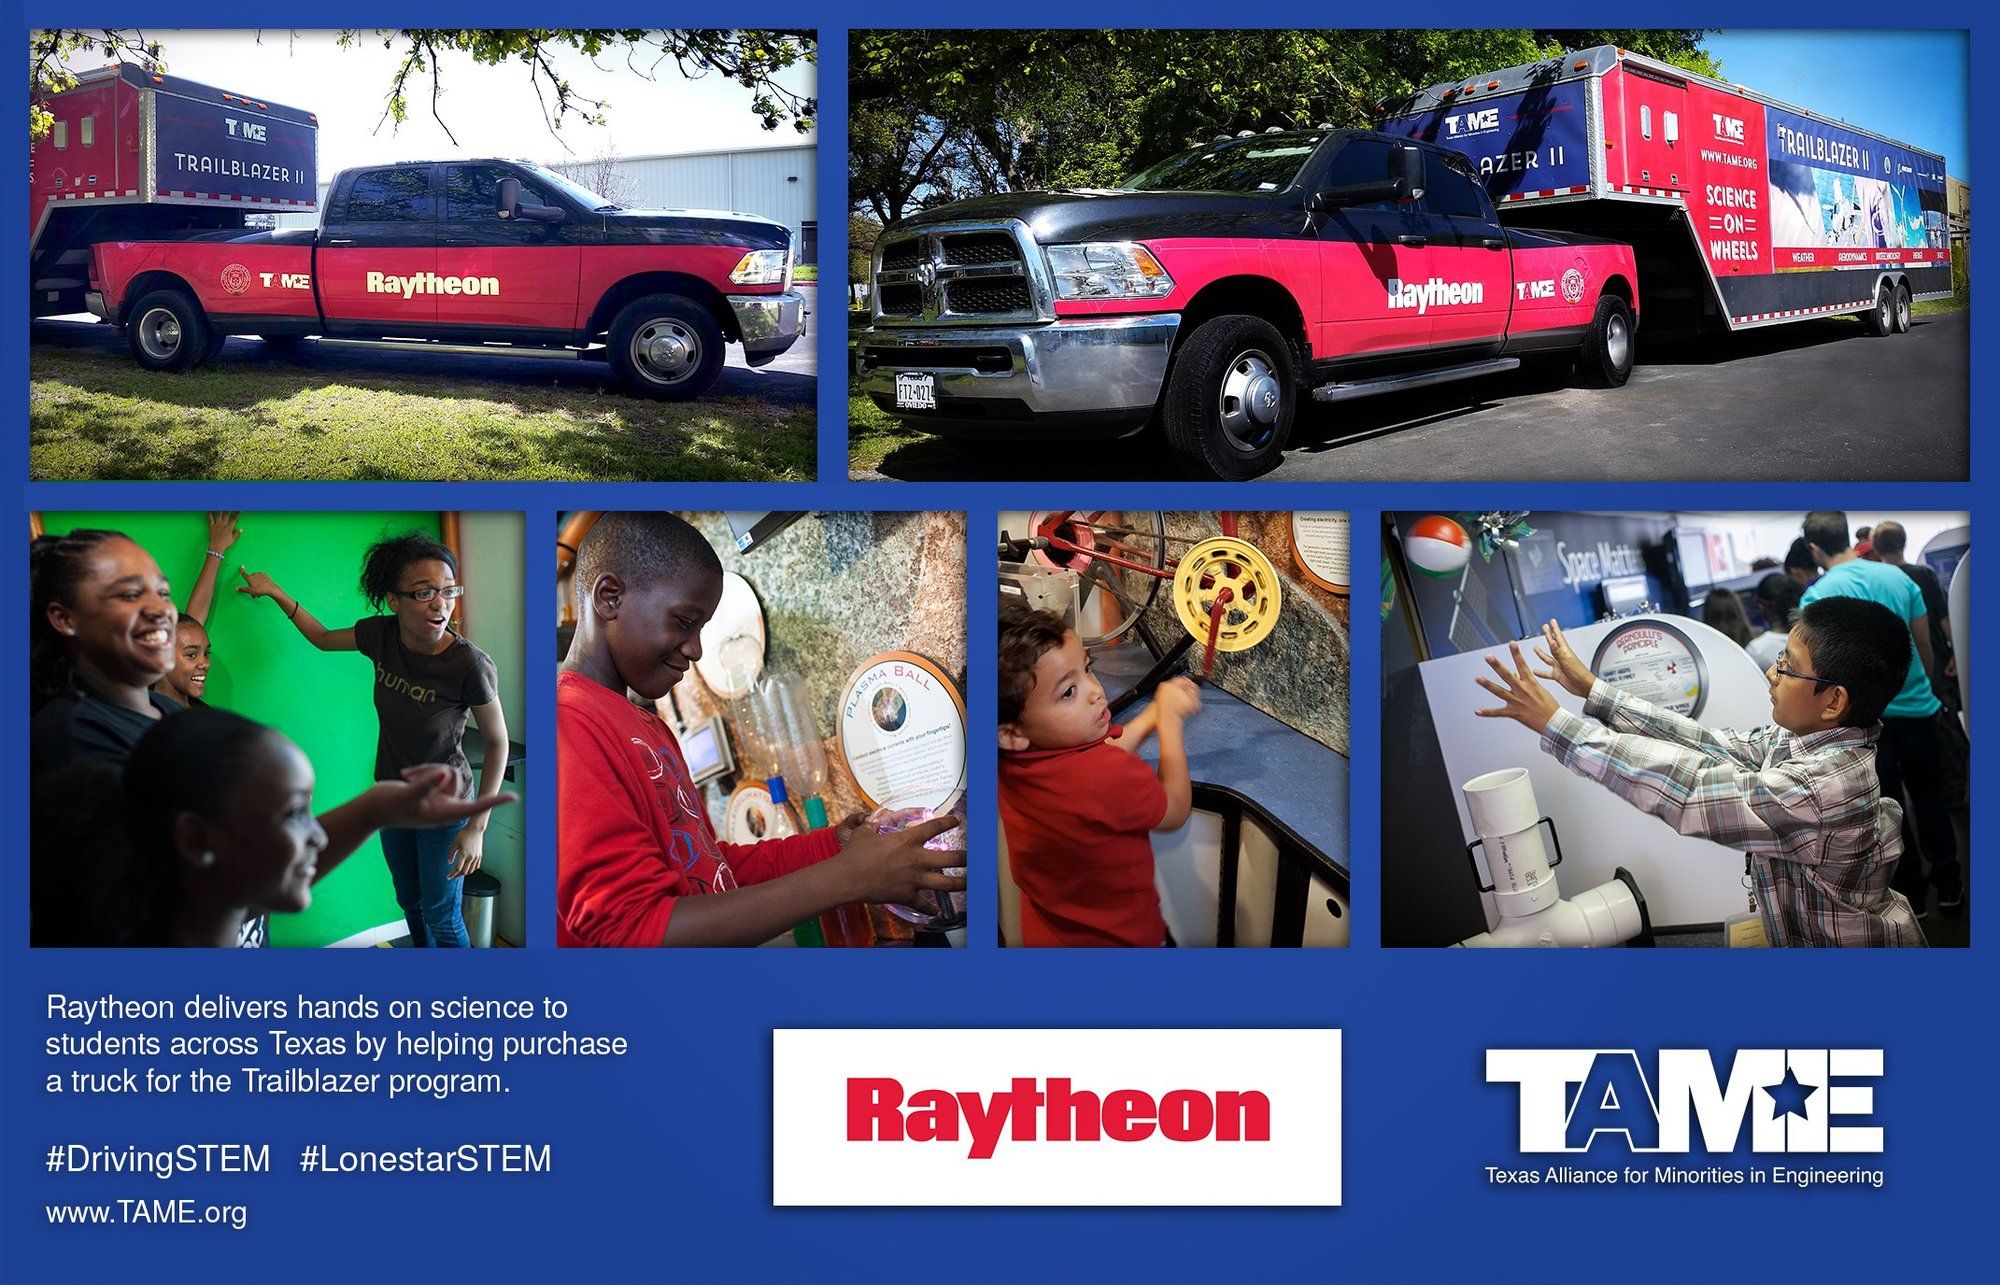 Raytheon delivers hands on science to students across Texas by helping purchase a truck for TAME's innovative Trailblazer program.